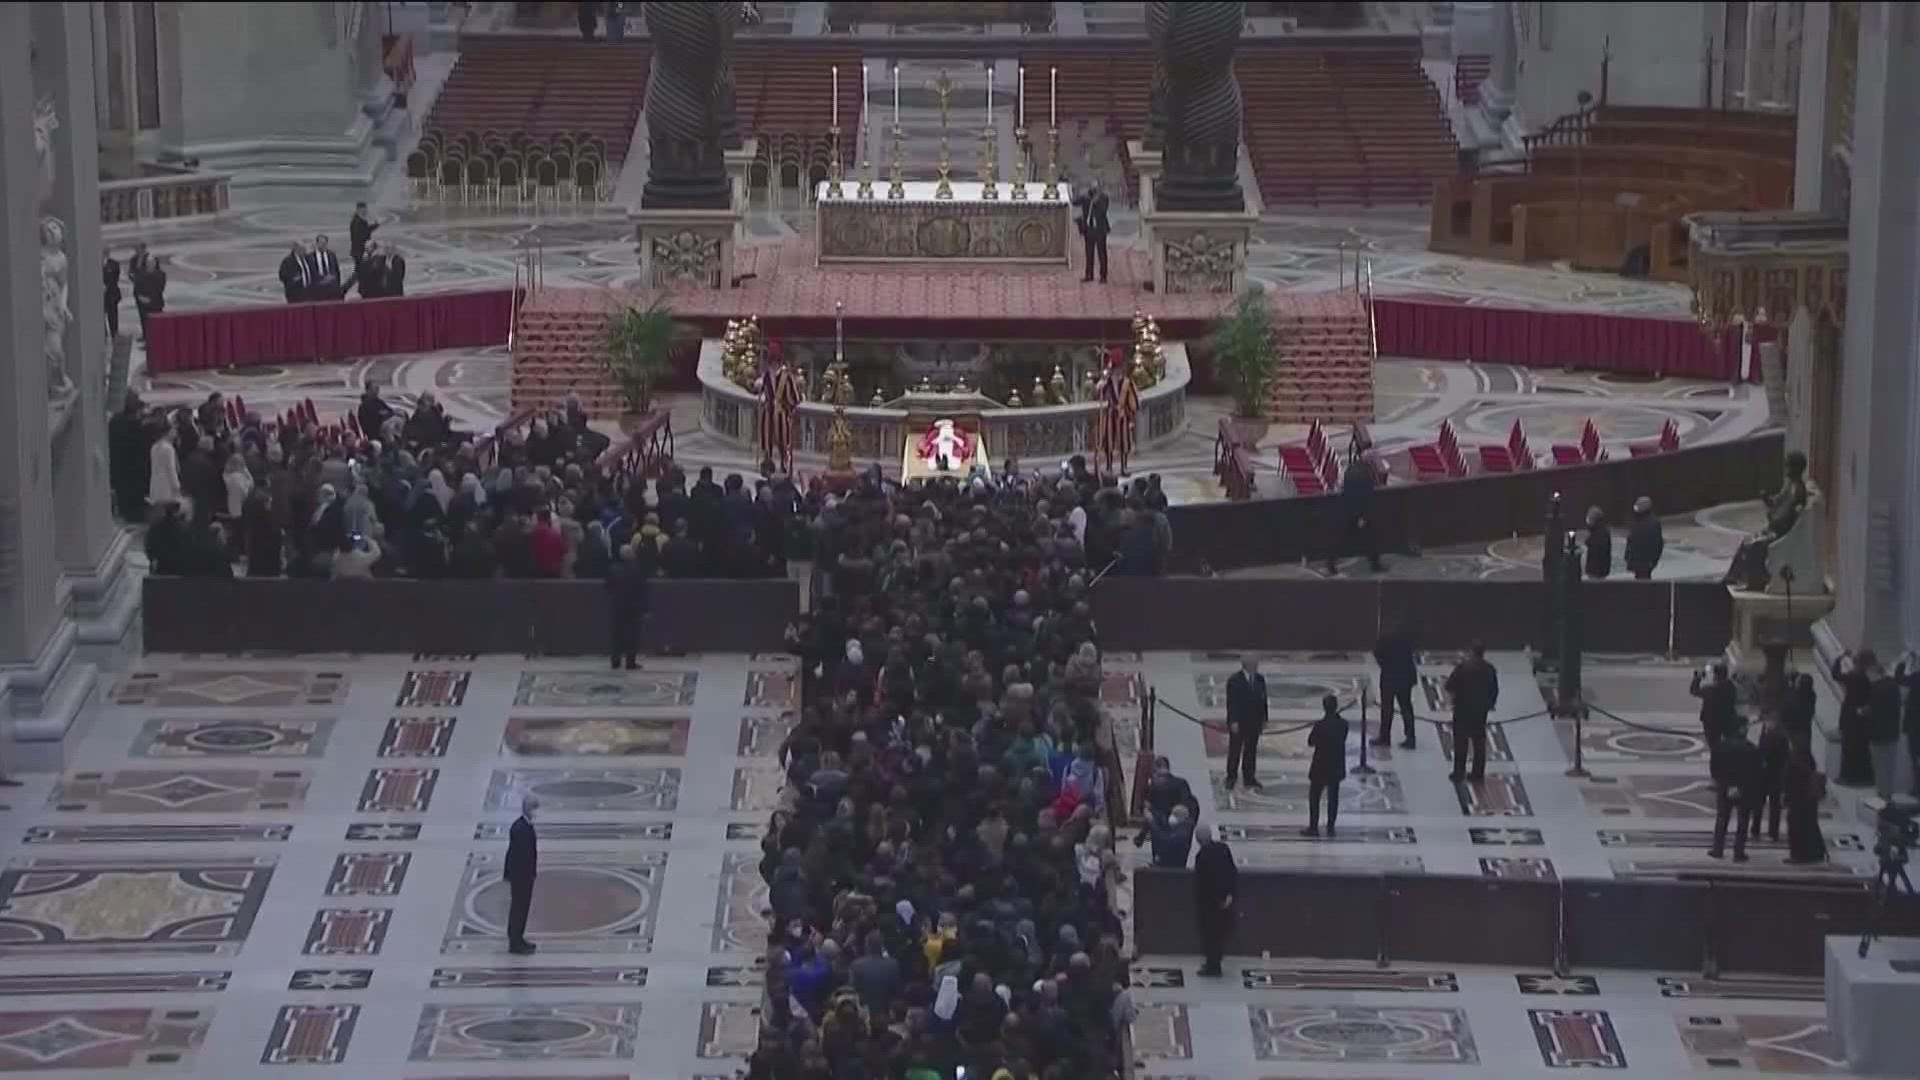 Officials expected at least 25,000 people to come and pay homage, but the crowd was more than twice that size.